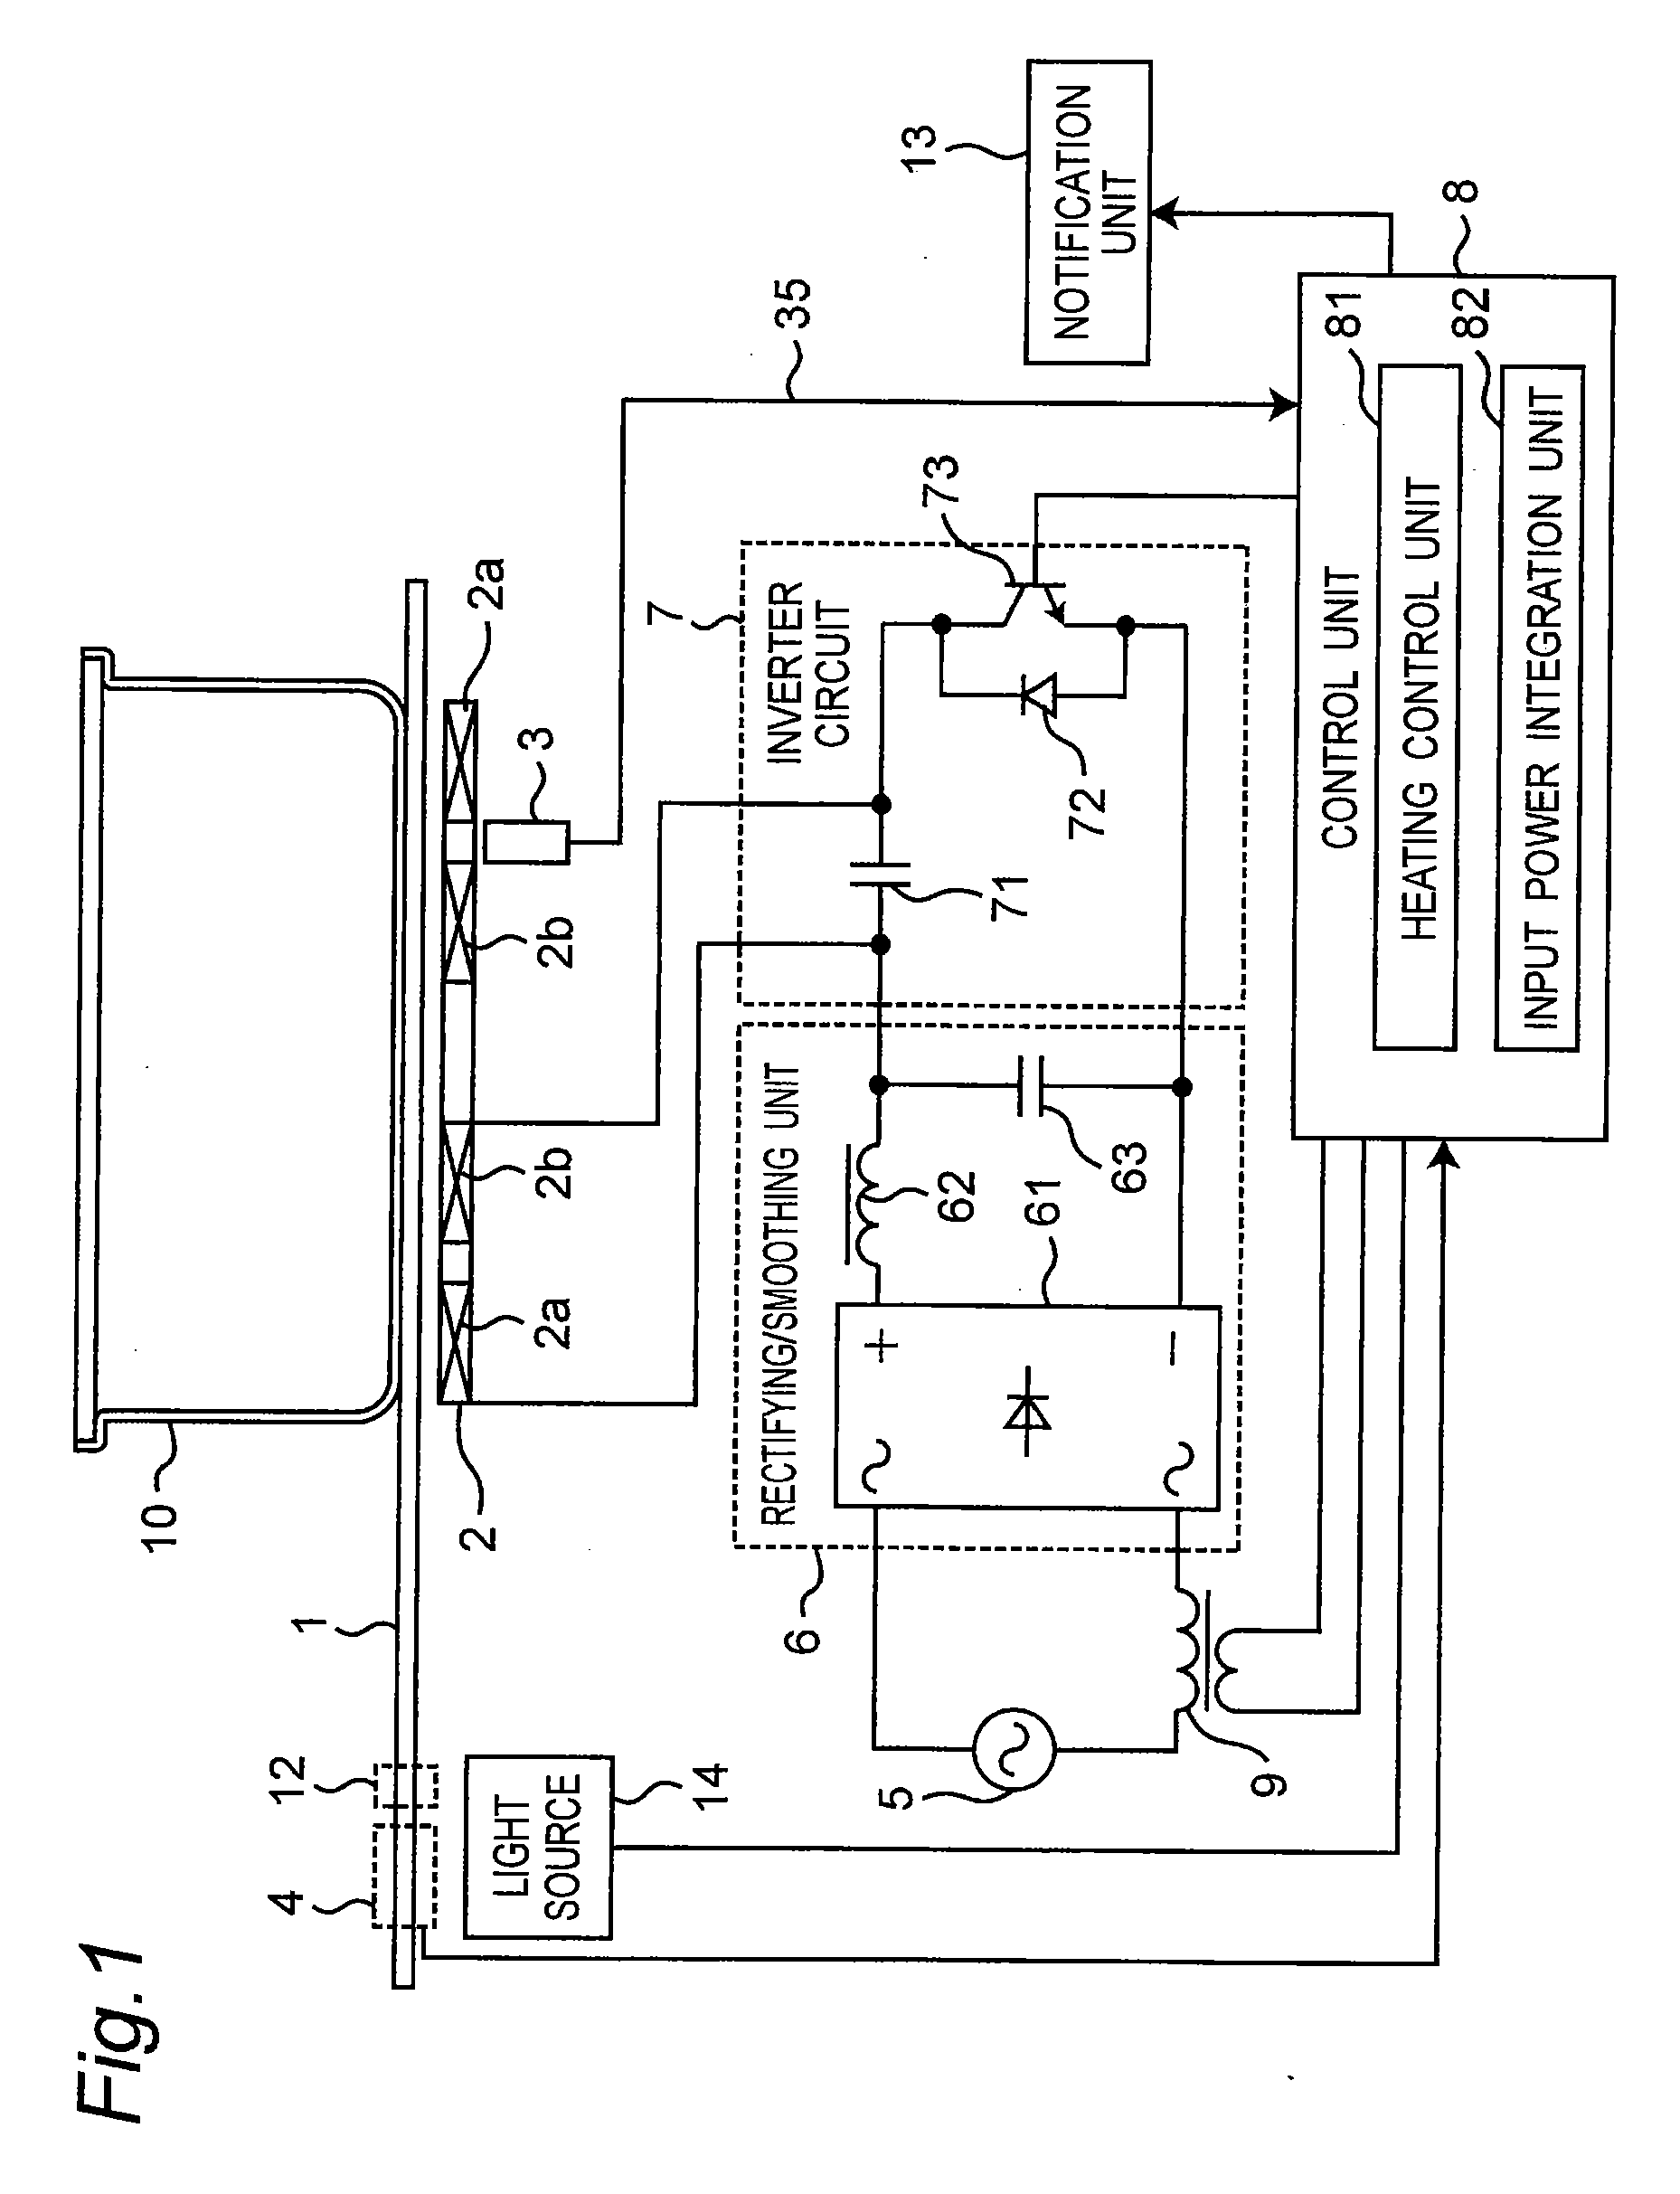 Induction heat cooking device